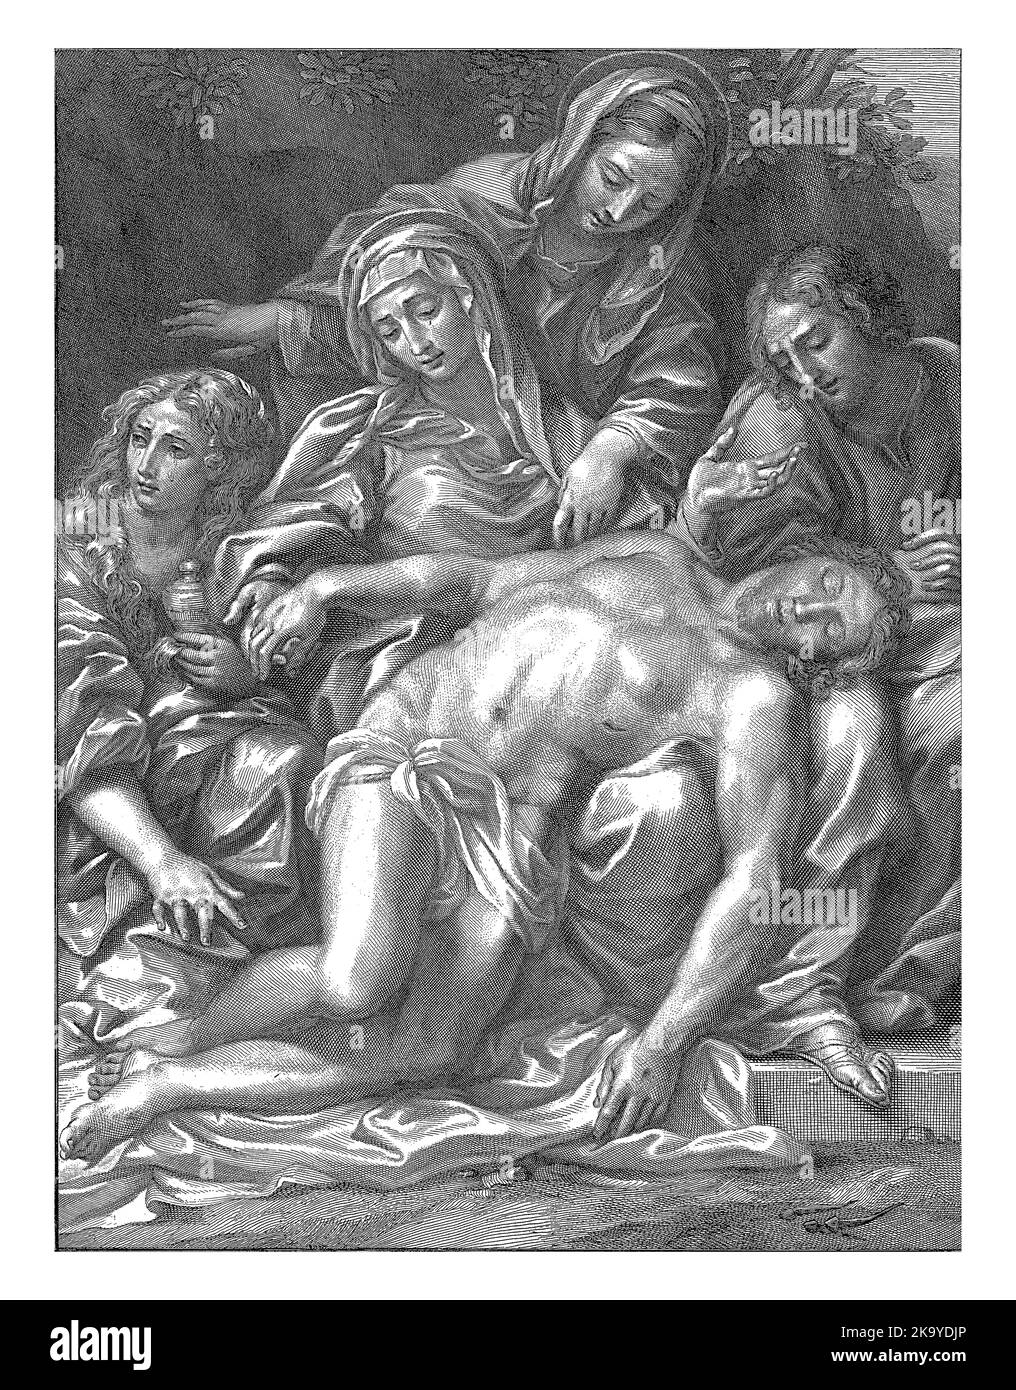 The body of Christ lies on Mary's lap. Mary, two other women, one with a nimbus, and a man mourning Christ. Stock Photo